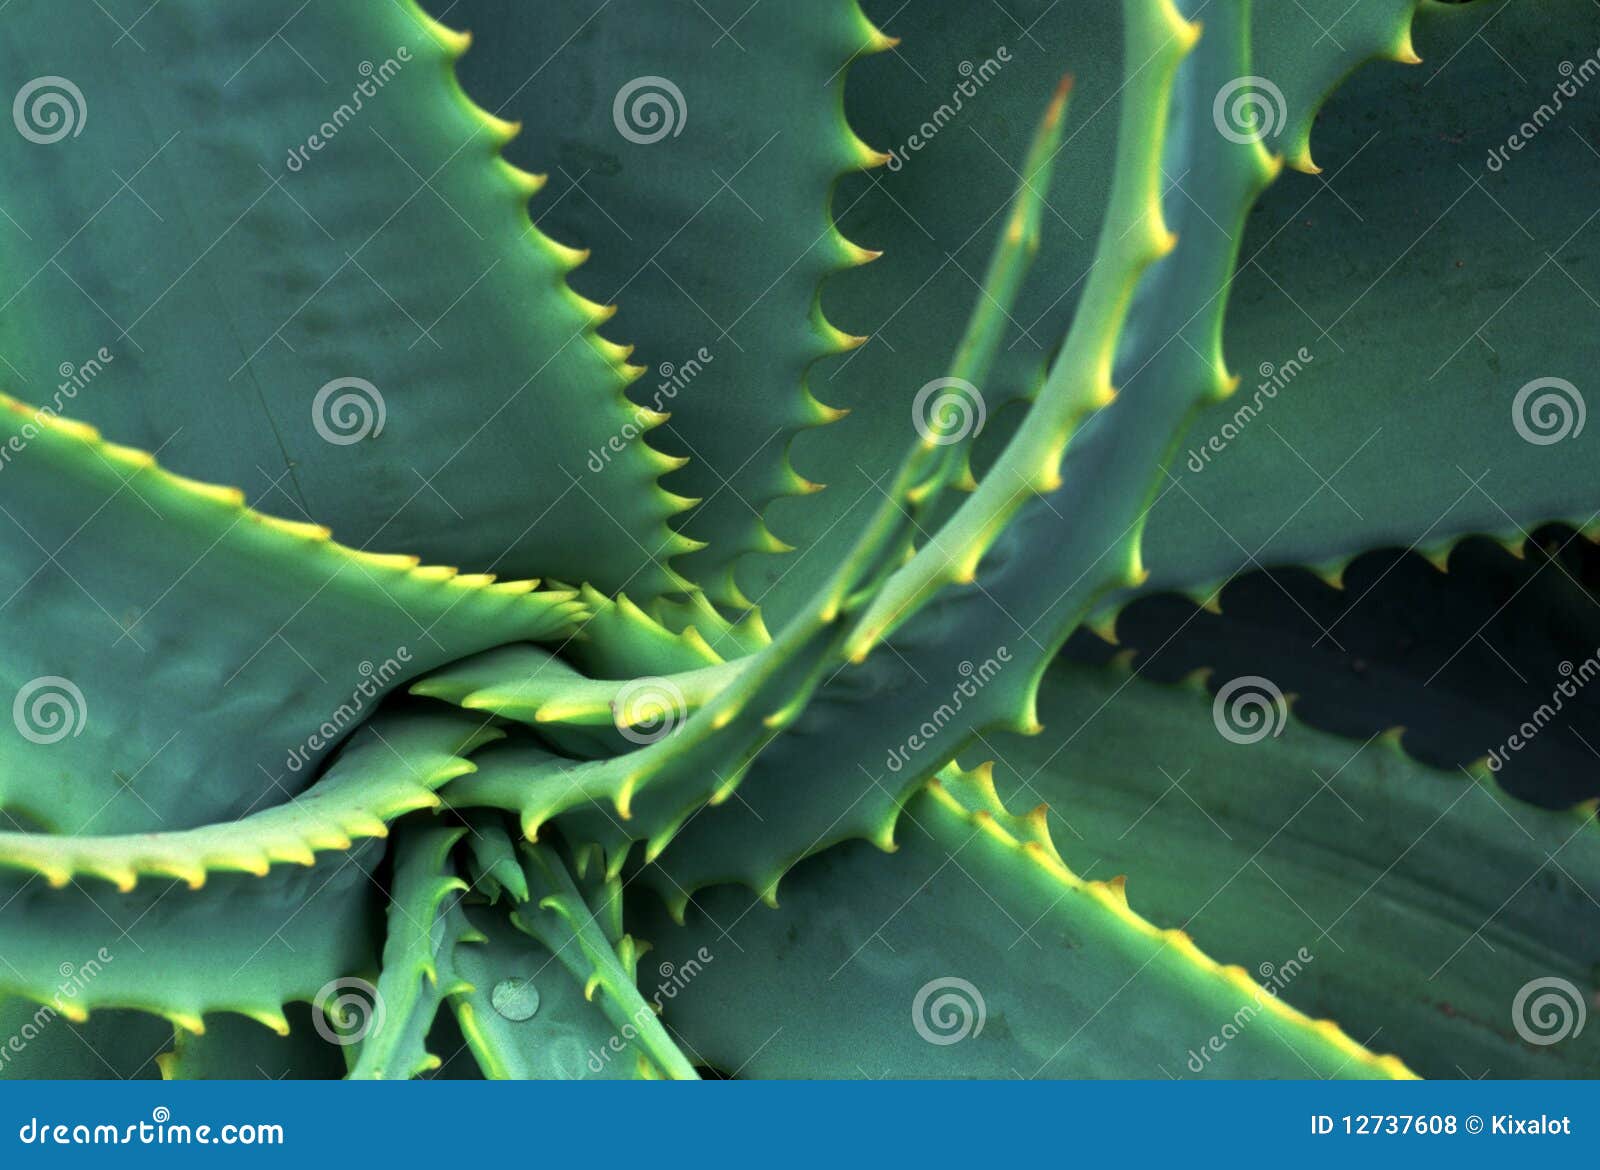 Spiraled And Spiked Aloe Vera Leaves Stock Photo Image Of Plants